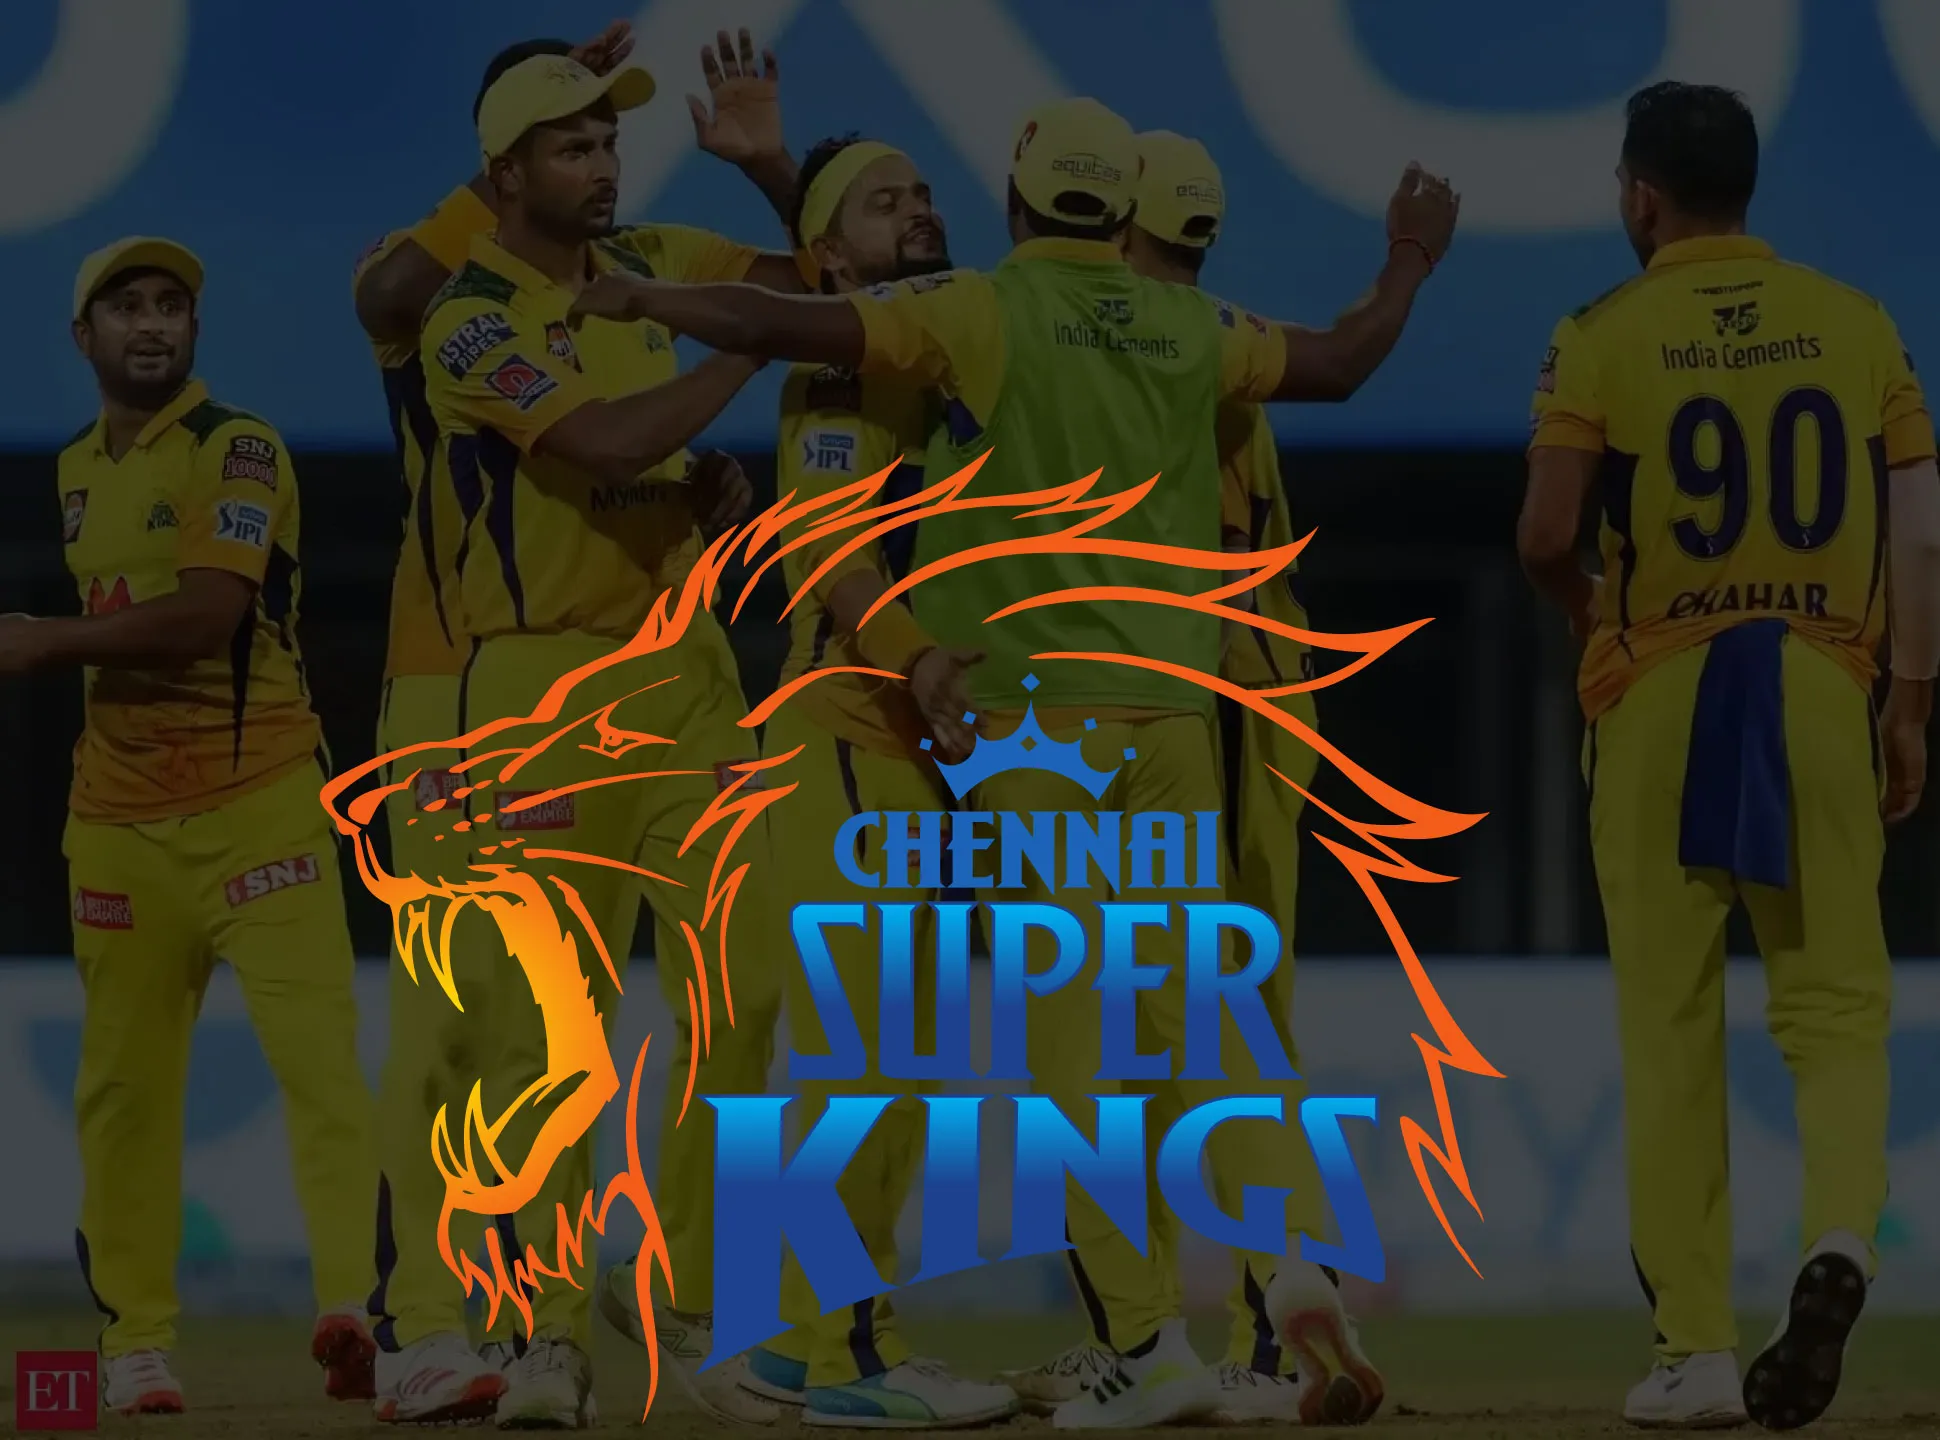 One of the strongest cricket teams is Chennai Super Kings.